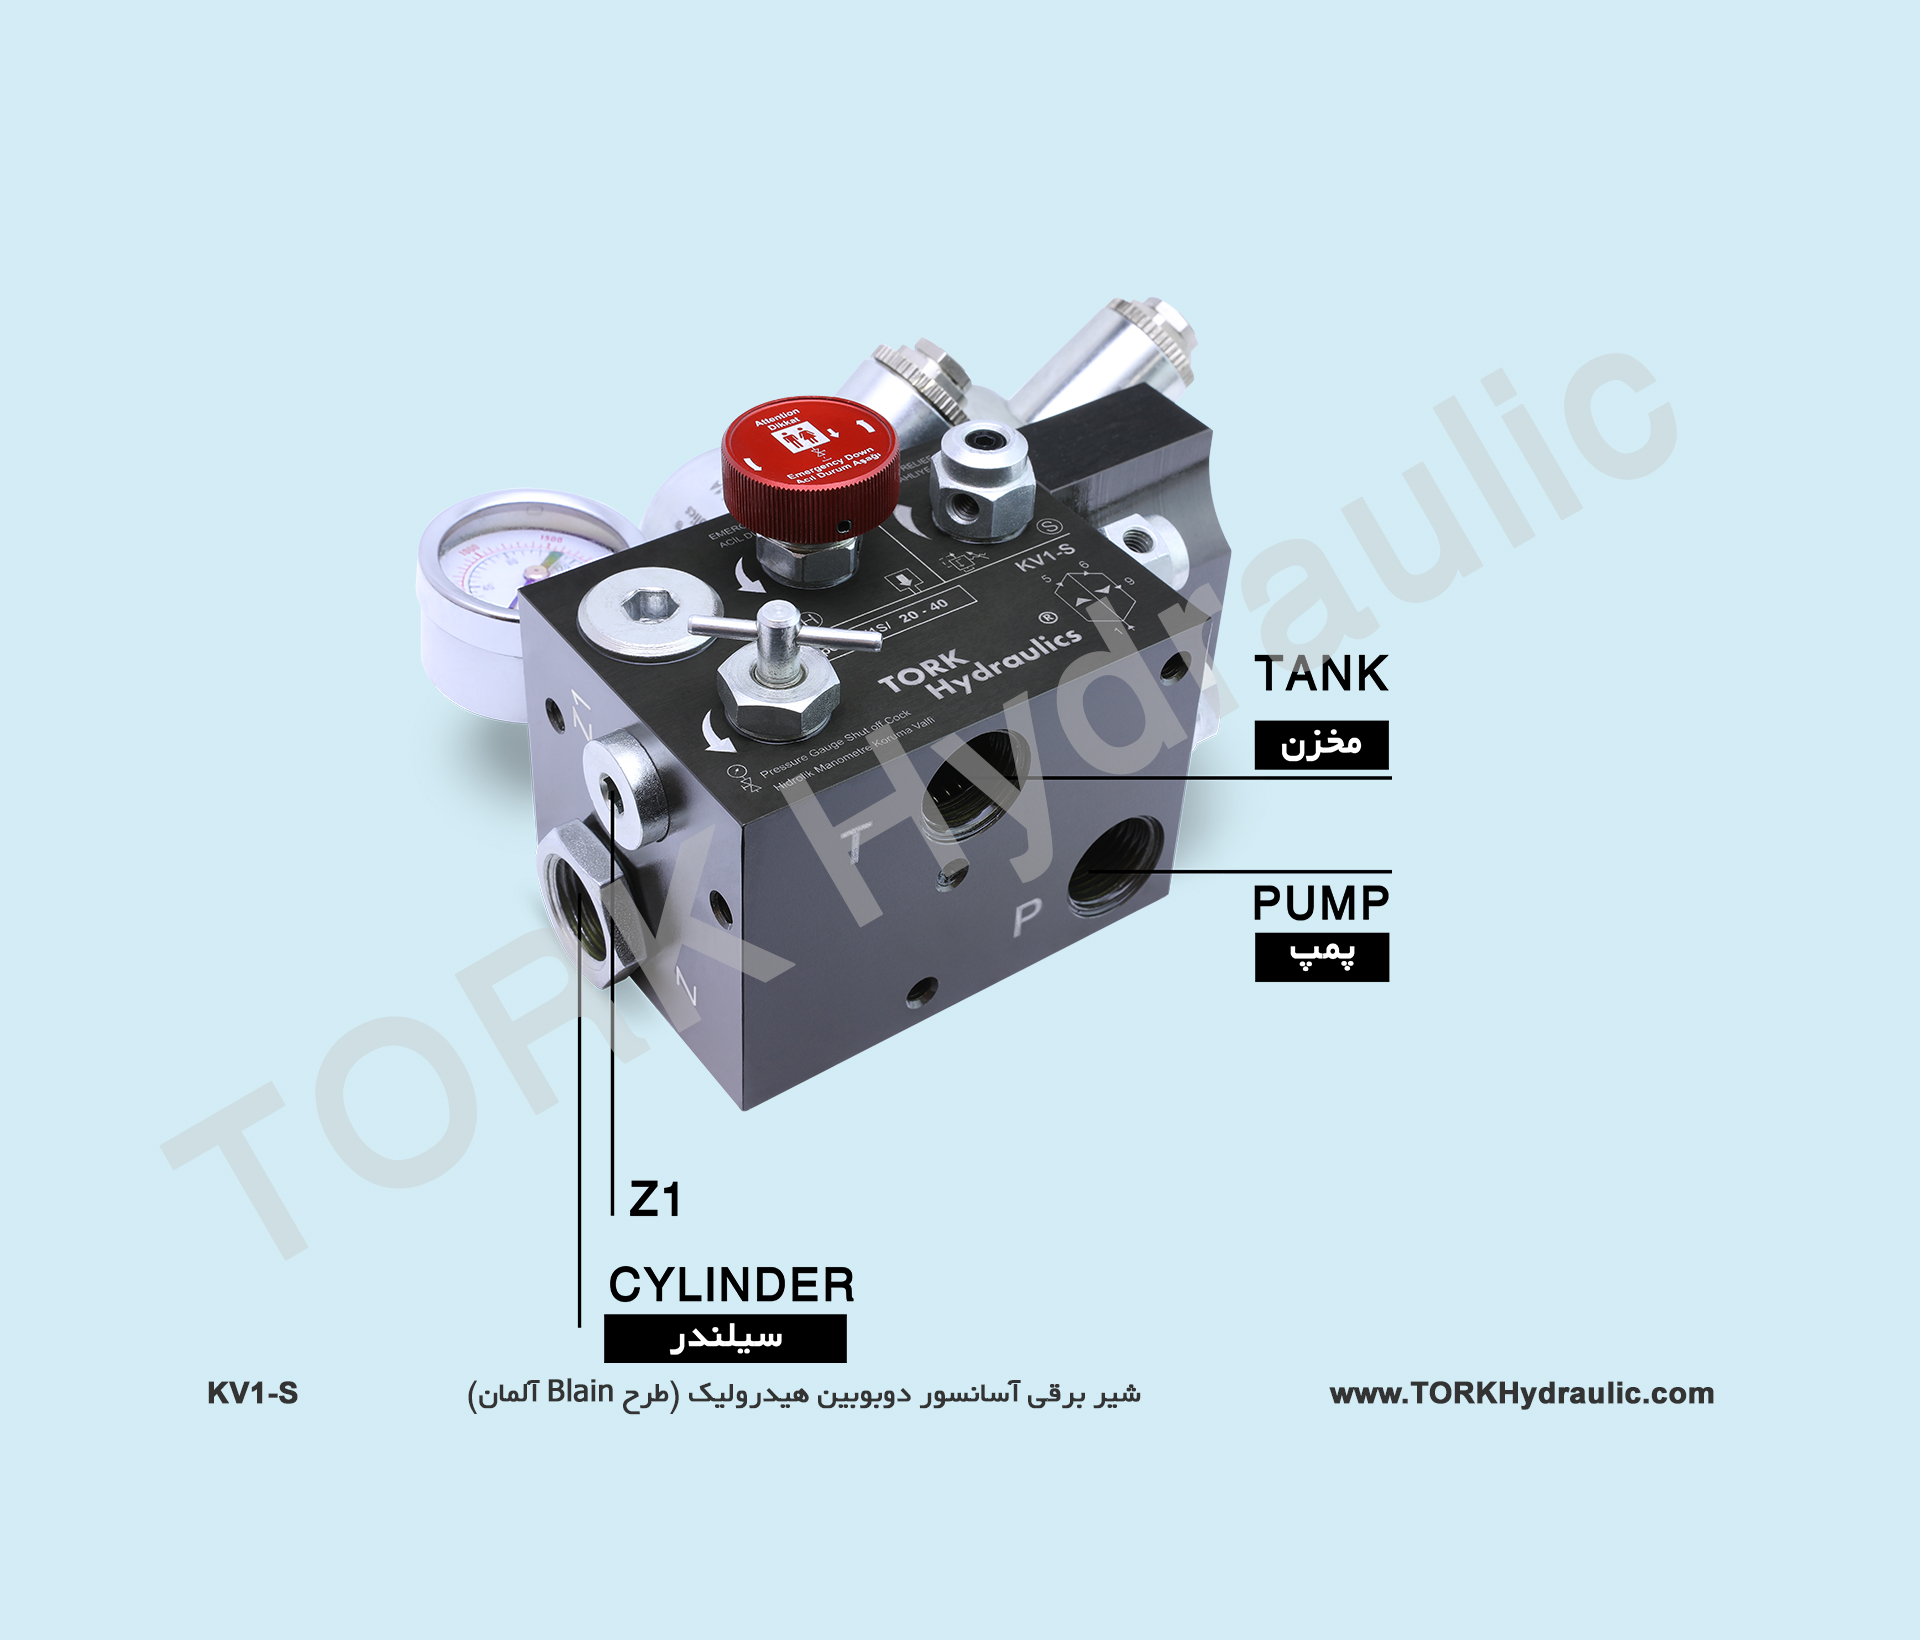 TORK Hydraulics two-coil lift solenoid valve